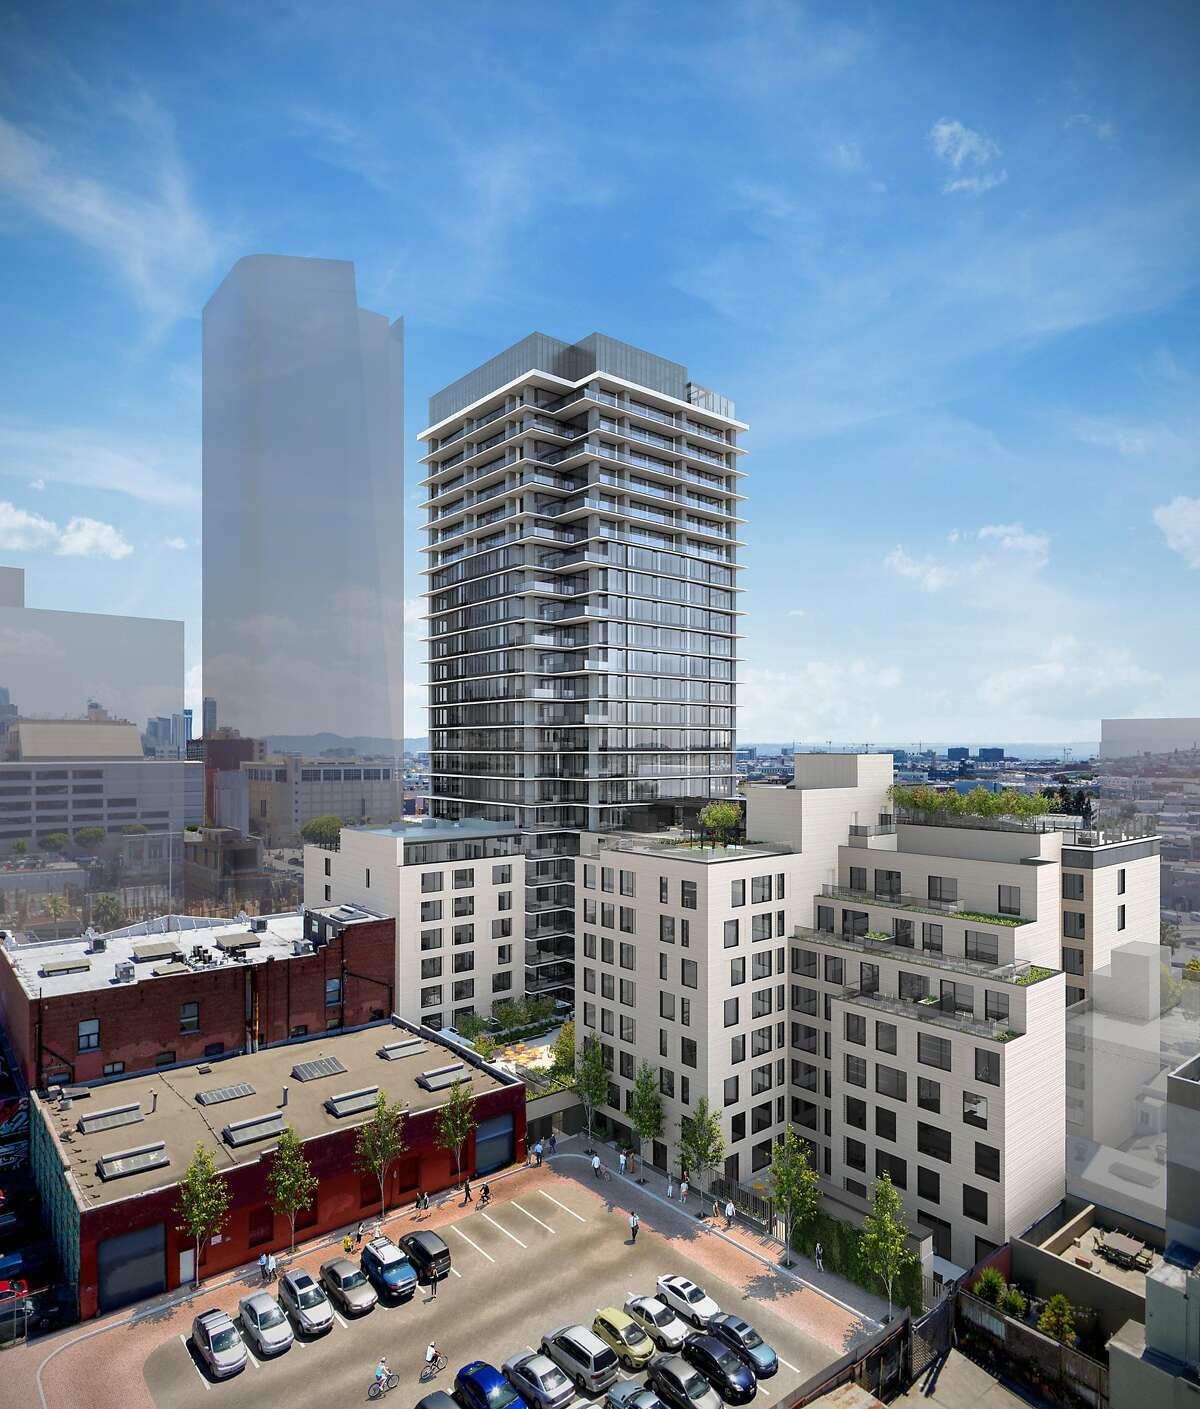 A rendering of the 30 Otis apartment tower, which will begin construction this winter near South Van Ness Avenue and Mission Street. It will include a home for the City Ballet School, and is the second high-rise development project within the area that San Francisco planners are calling the Hub.